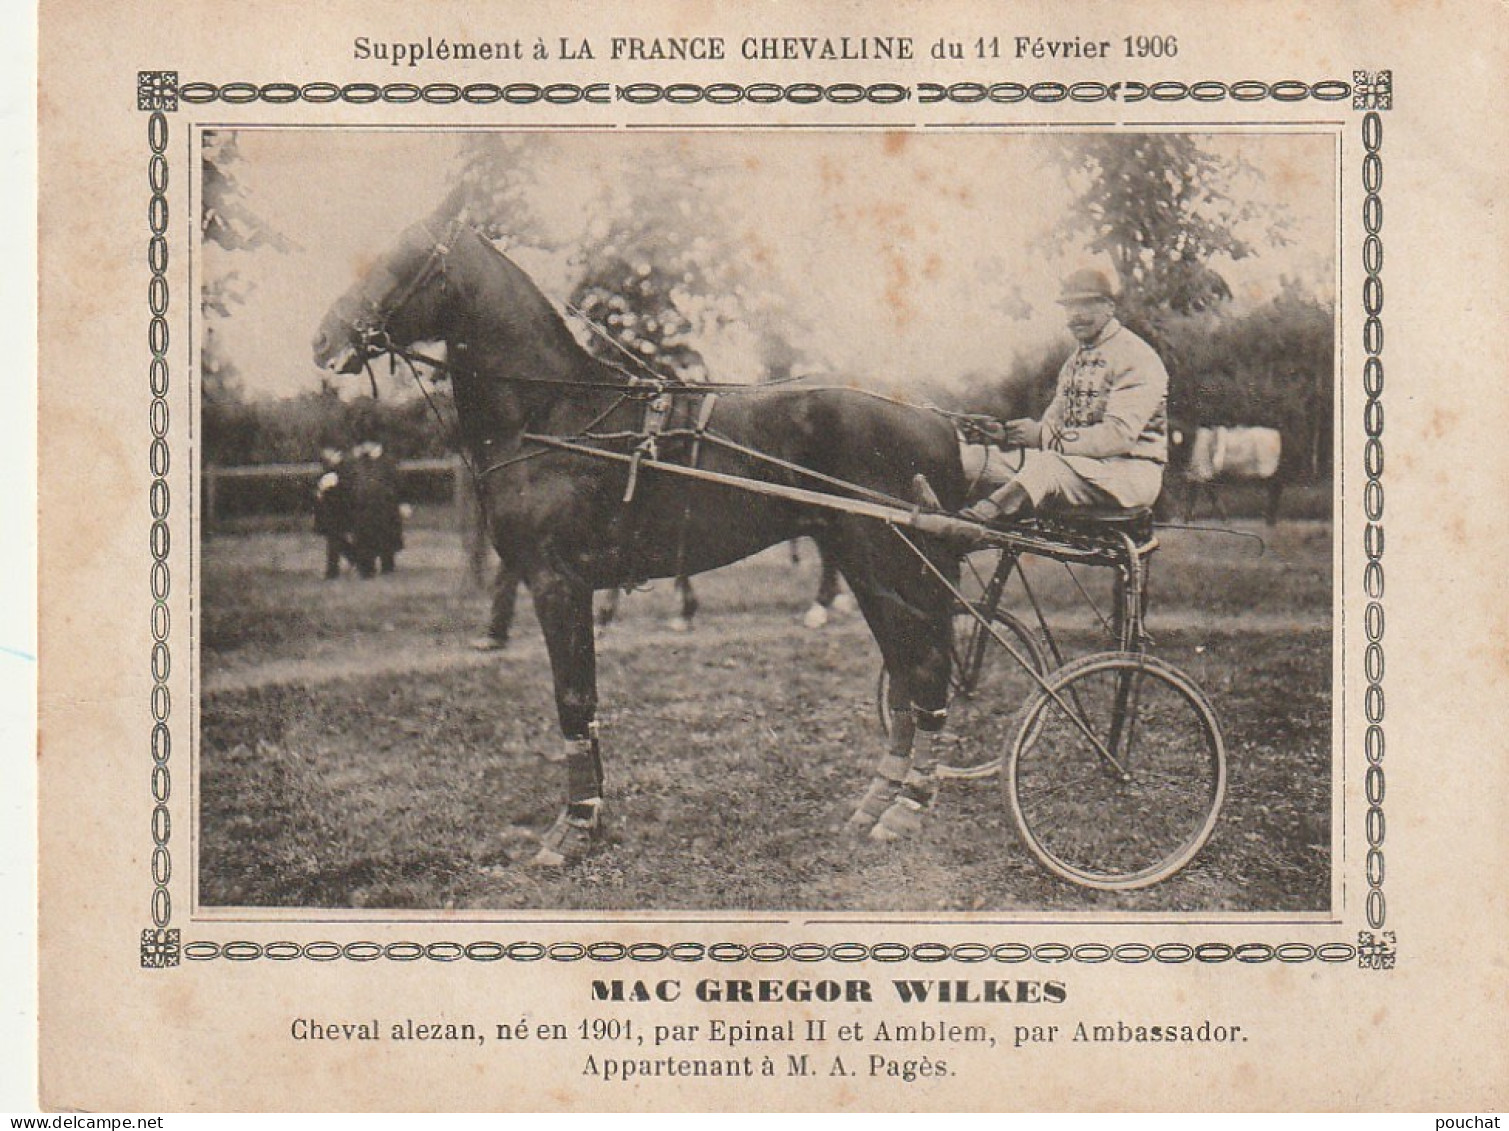 AA+ - " MAC GREGOR WILKES " - CHEVAL ALEZAN APPARTENANT A M. A. PAGES - SUPPL. " FRANCE CHEVALINE " , FEV. 1906 - SULKY - Hípica